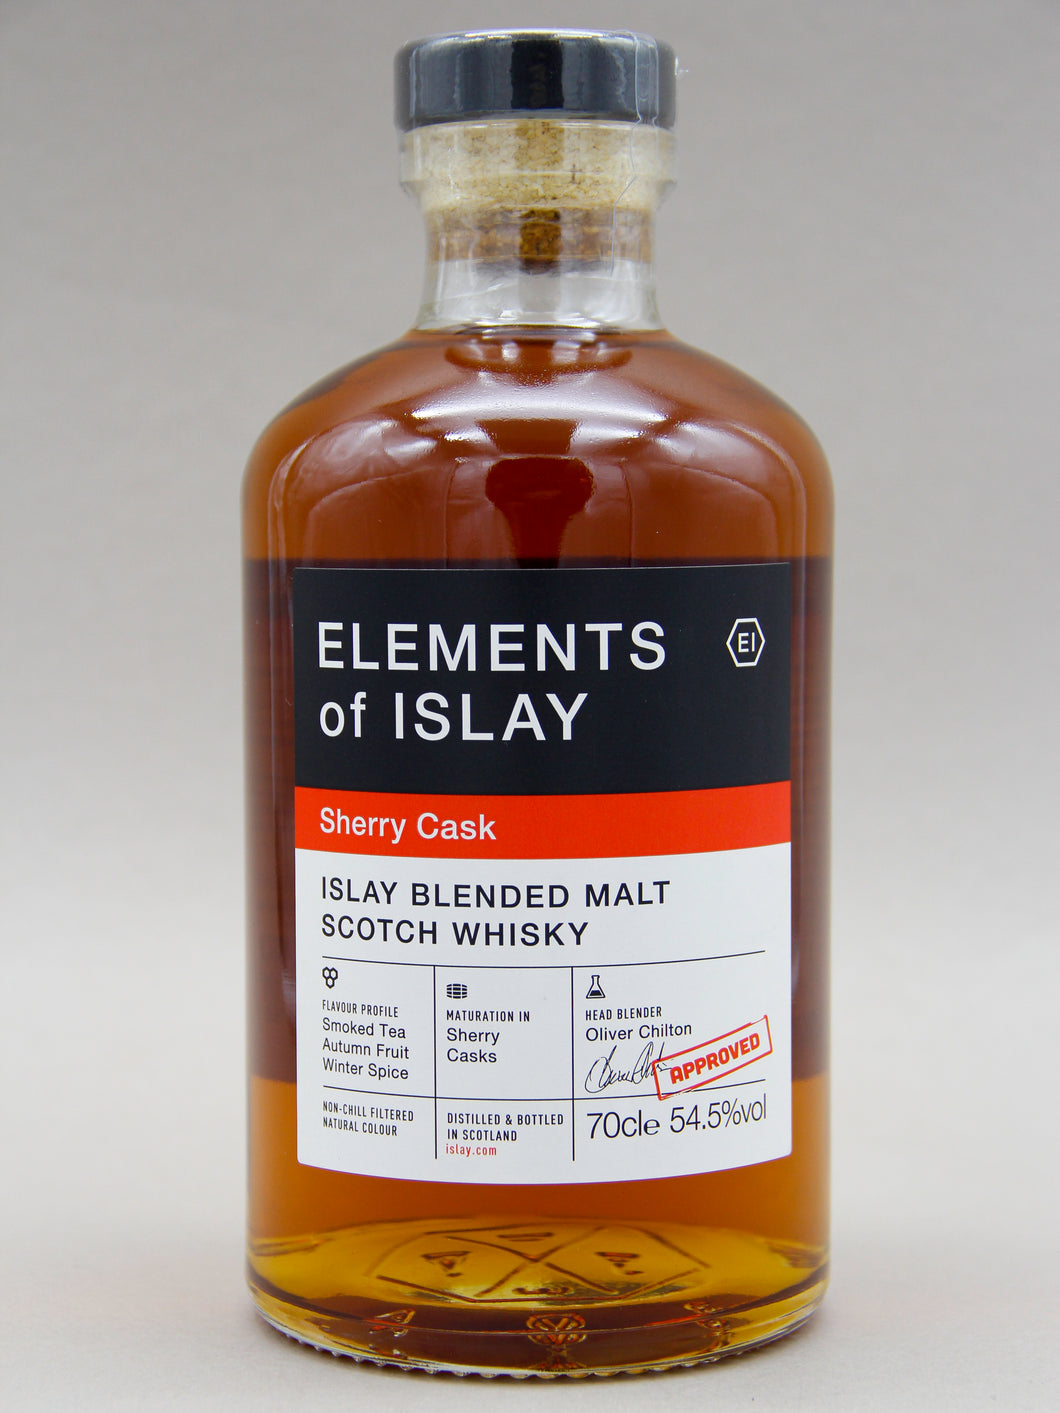 Elements of Islay, Sherry Cask, Islay Blended Malt Scotch Whisky (54.5%, 70cl)